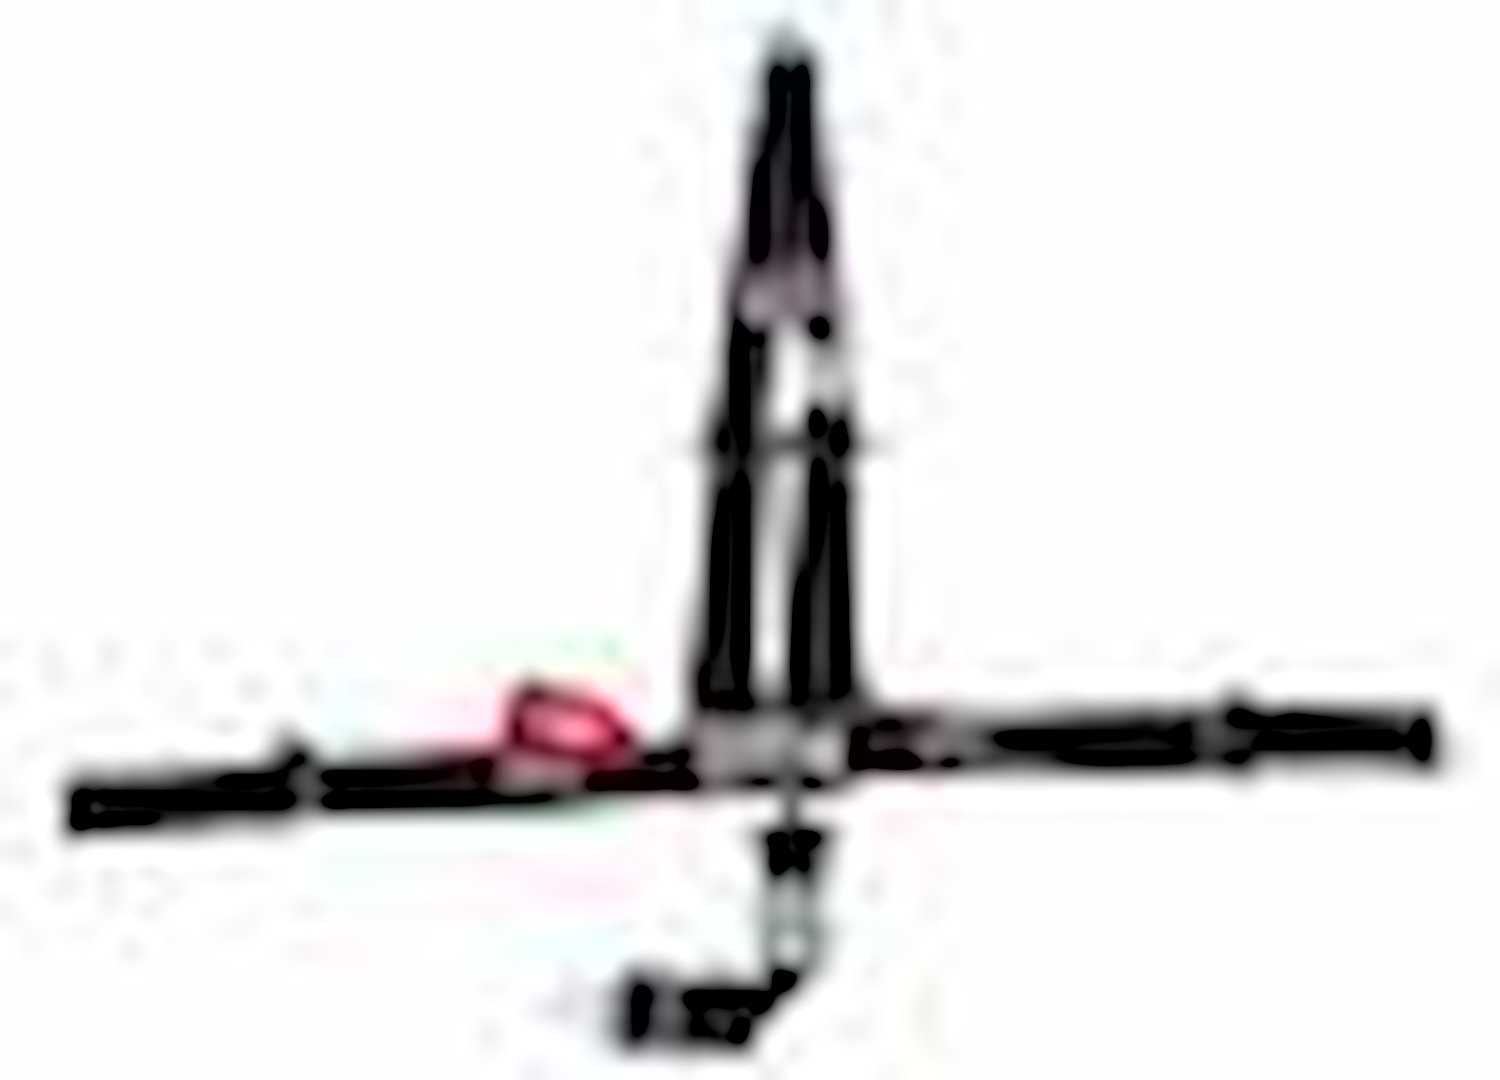 SFI 16.1 L&L HARNESS 2 PULL UP Lap Belt 2 Shoulder Harness Individual ROLL BAR Mount 2 DOUBLE Sub ALL WRAP ENDS HOT PINK